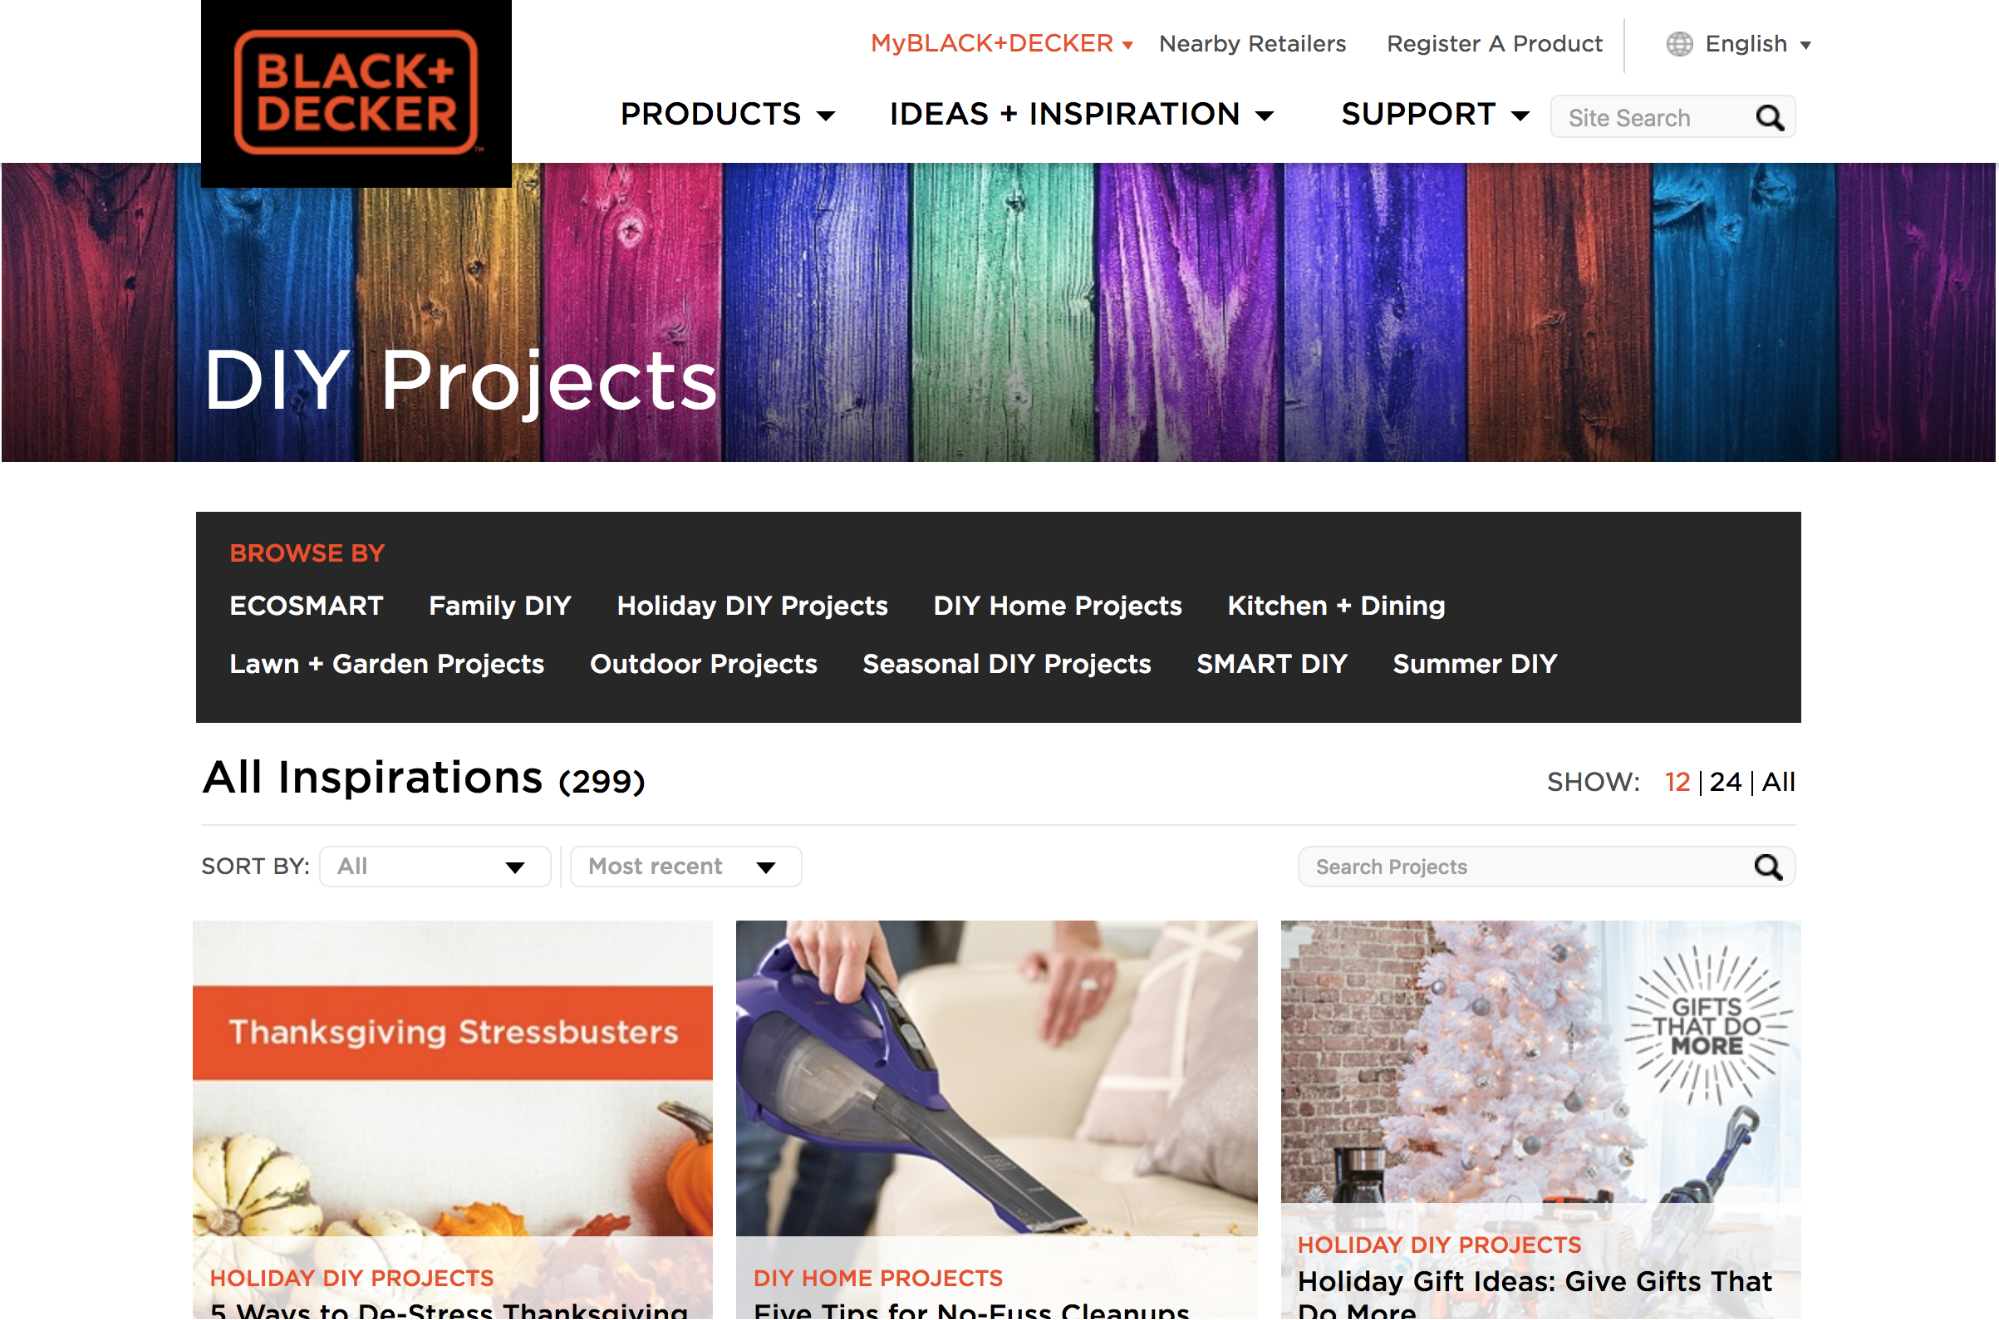 Screenshot showing DIY projects page on black+decker